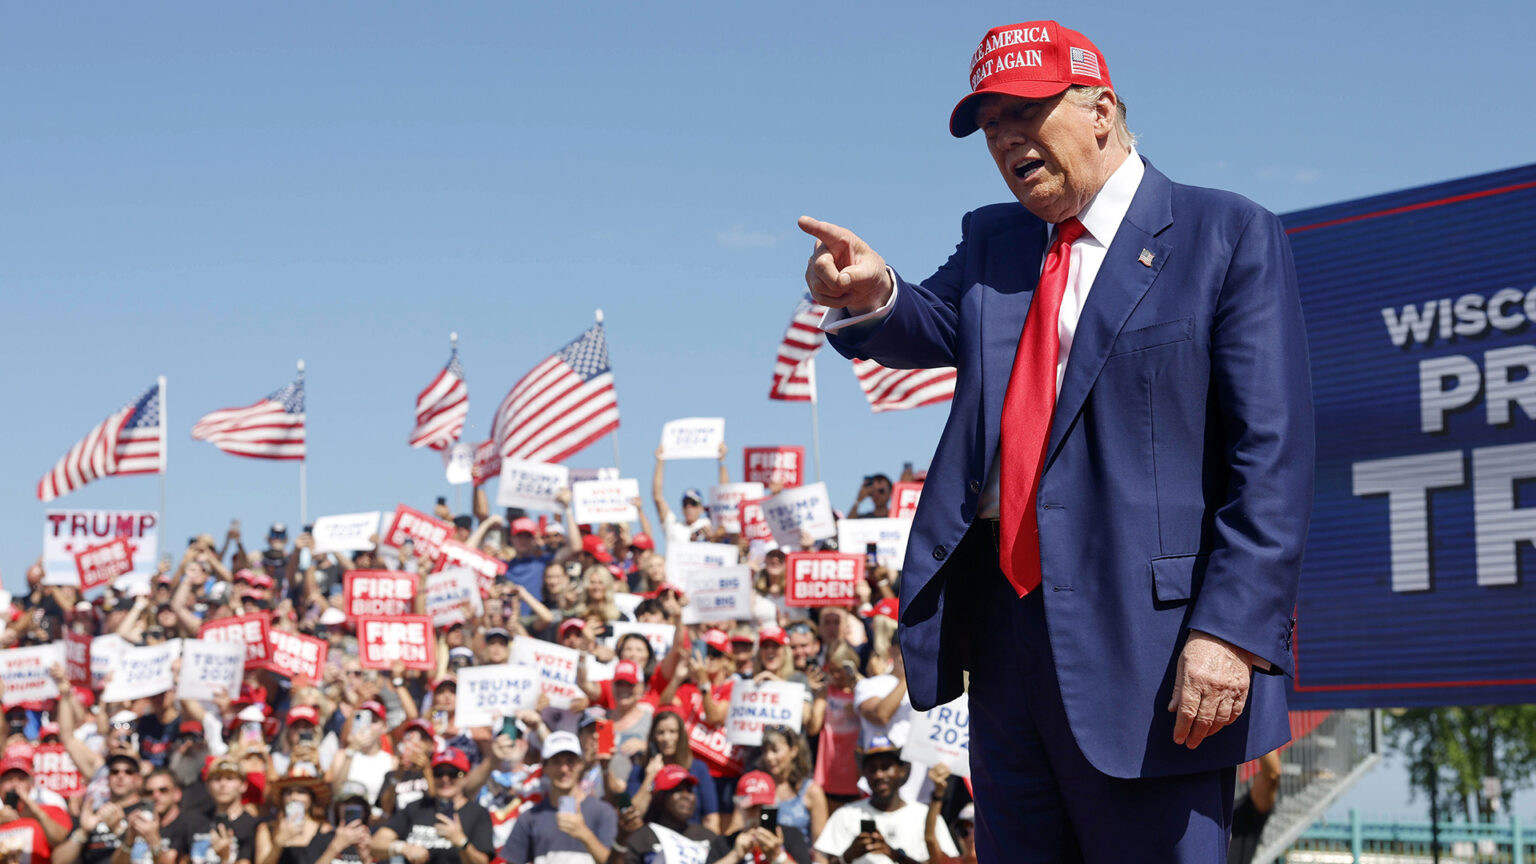 Donald Trump points with his right index finger and speaks while standing in front of seating risers filled with people holding political campaign signs, with a row of U.S. flags in the background.